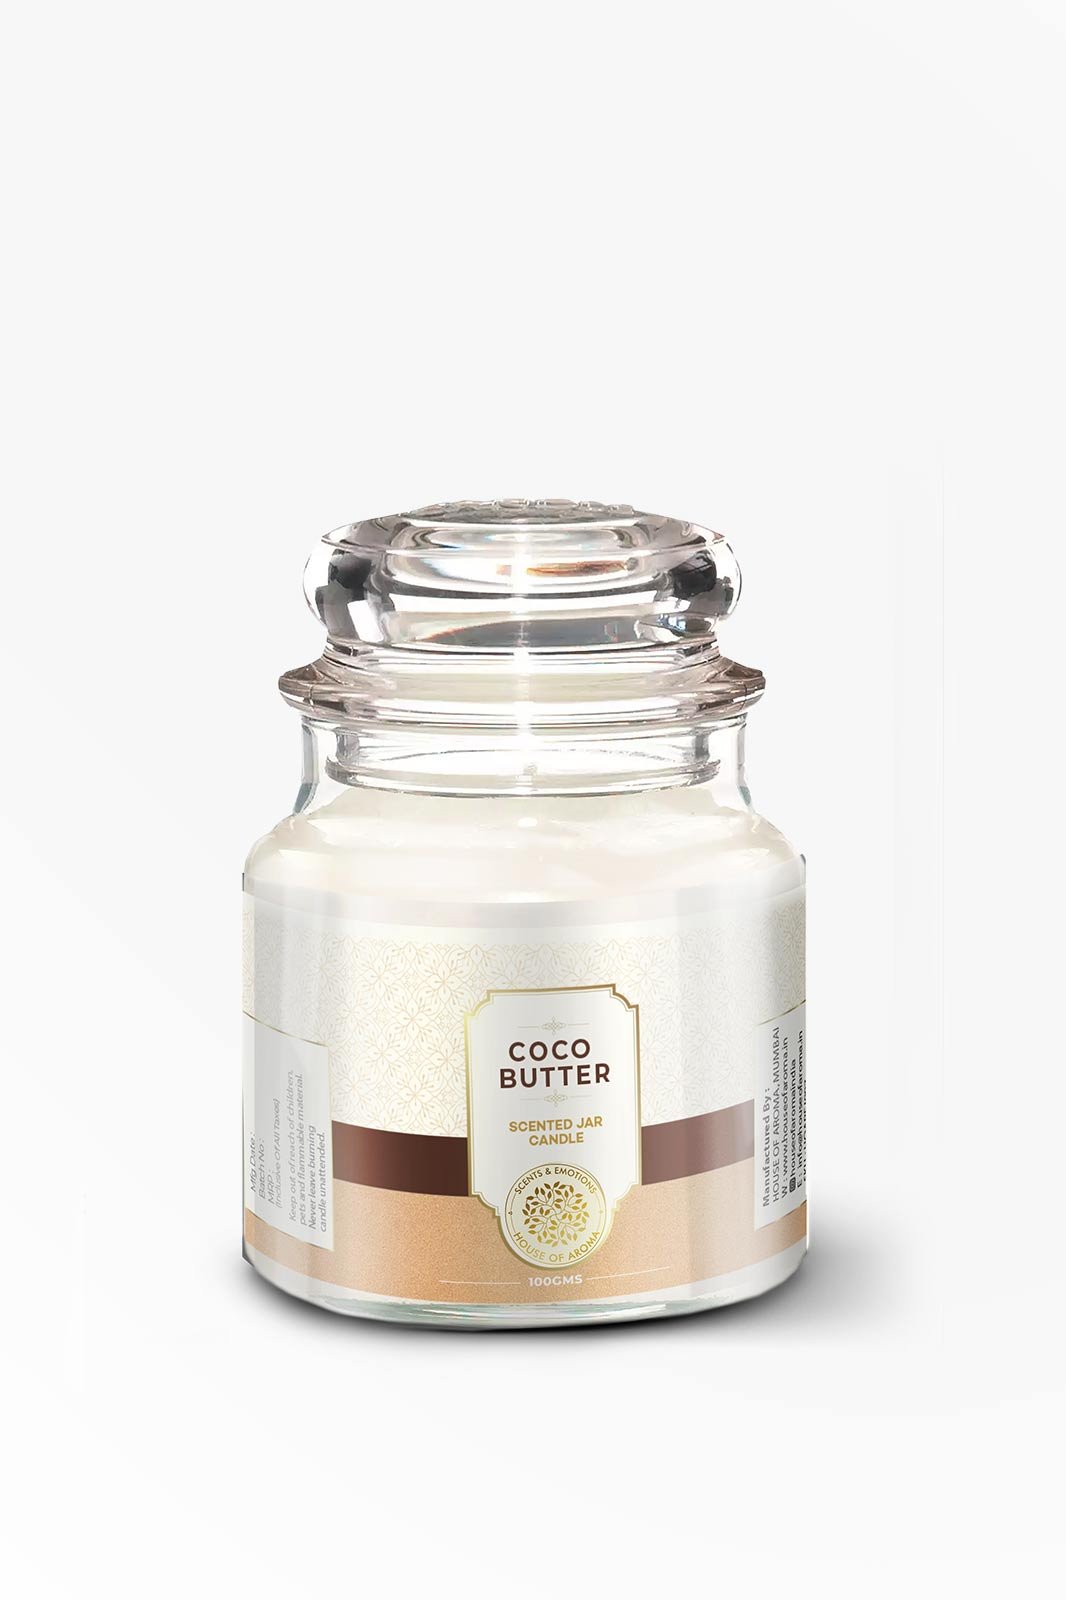 Coco butter bell jar candle, scented candle coco butter, best-scented candles brand India, scented candles for concentration, coco butter for candles, scented candles set, scented candles jar, scented candles best brand, buy scented candles near me, scented candle for relaxation, paraffin wax, paraffin wax uses, scented candles online, scented candles gift set, fragrance oils for candles, candles decoration in room, room decor with candles, home decor candles.